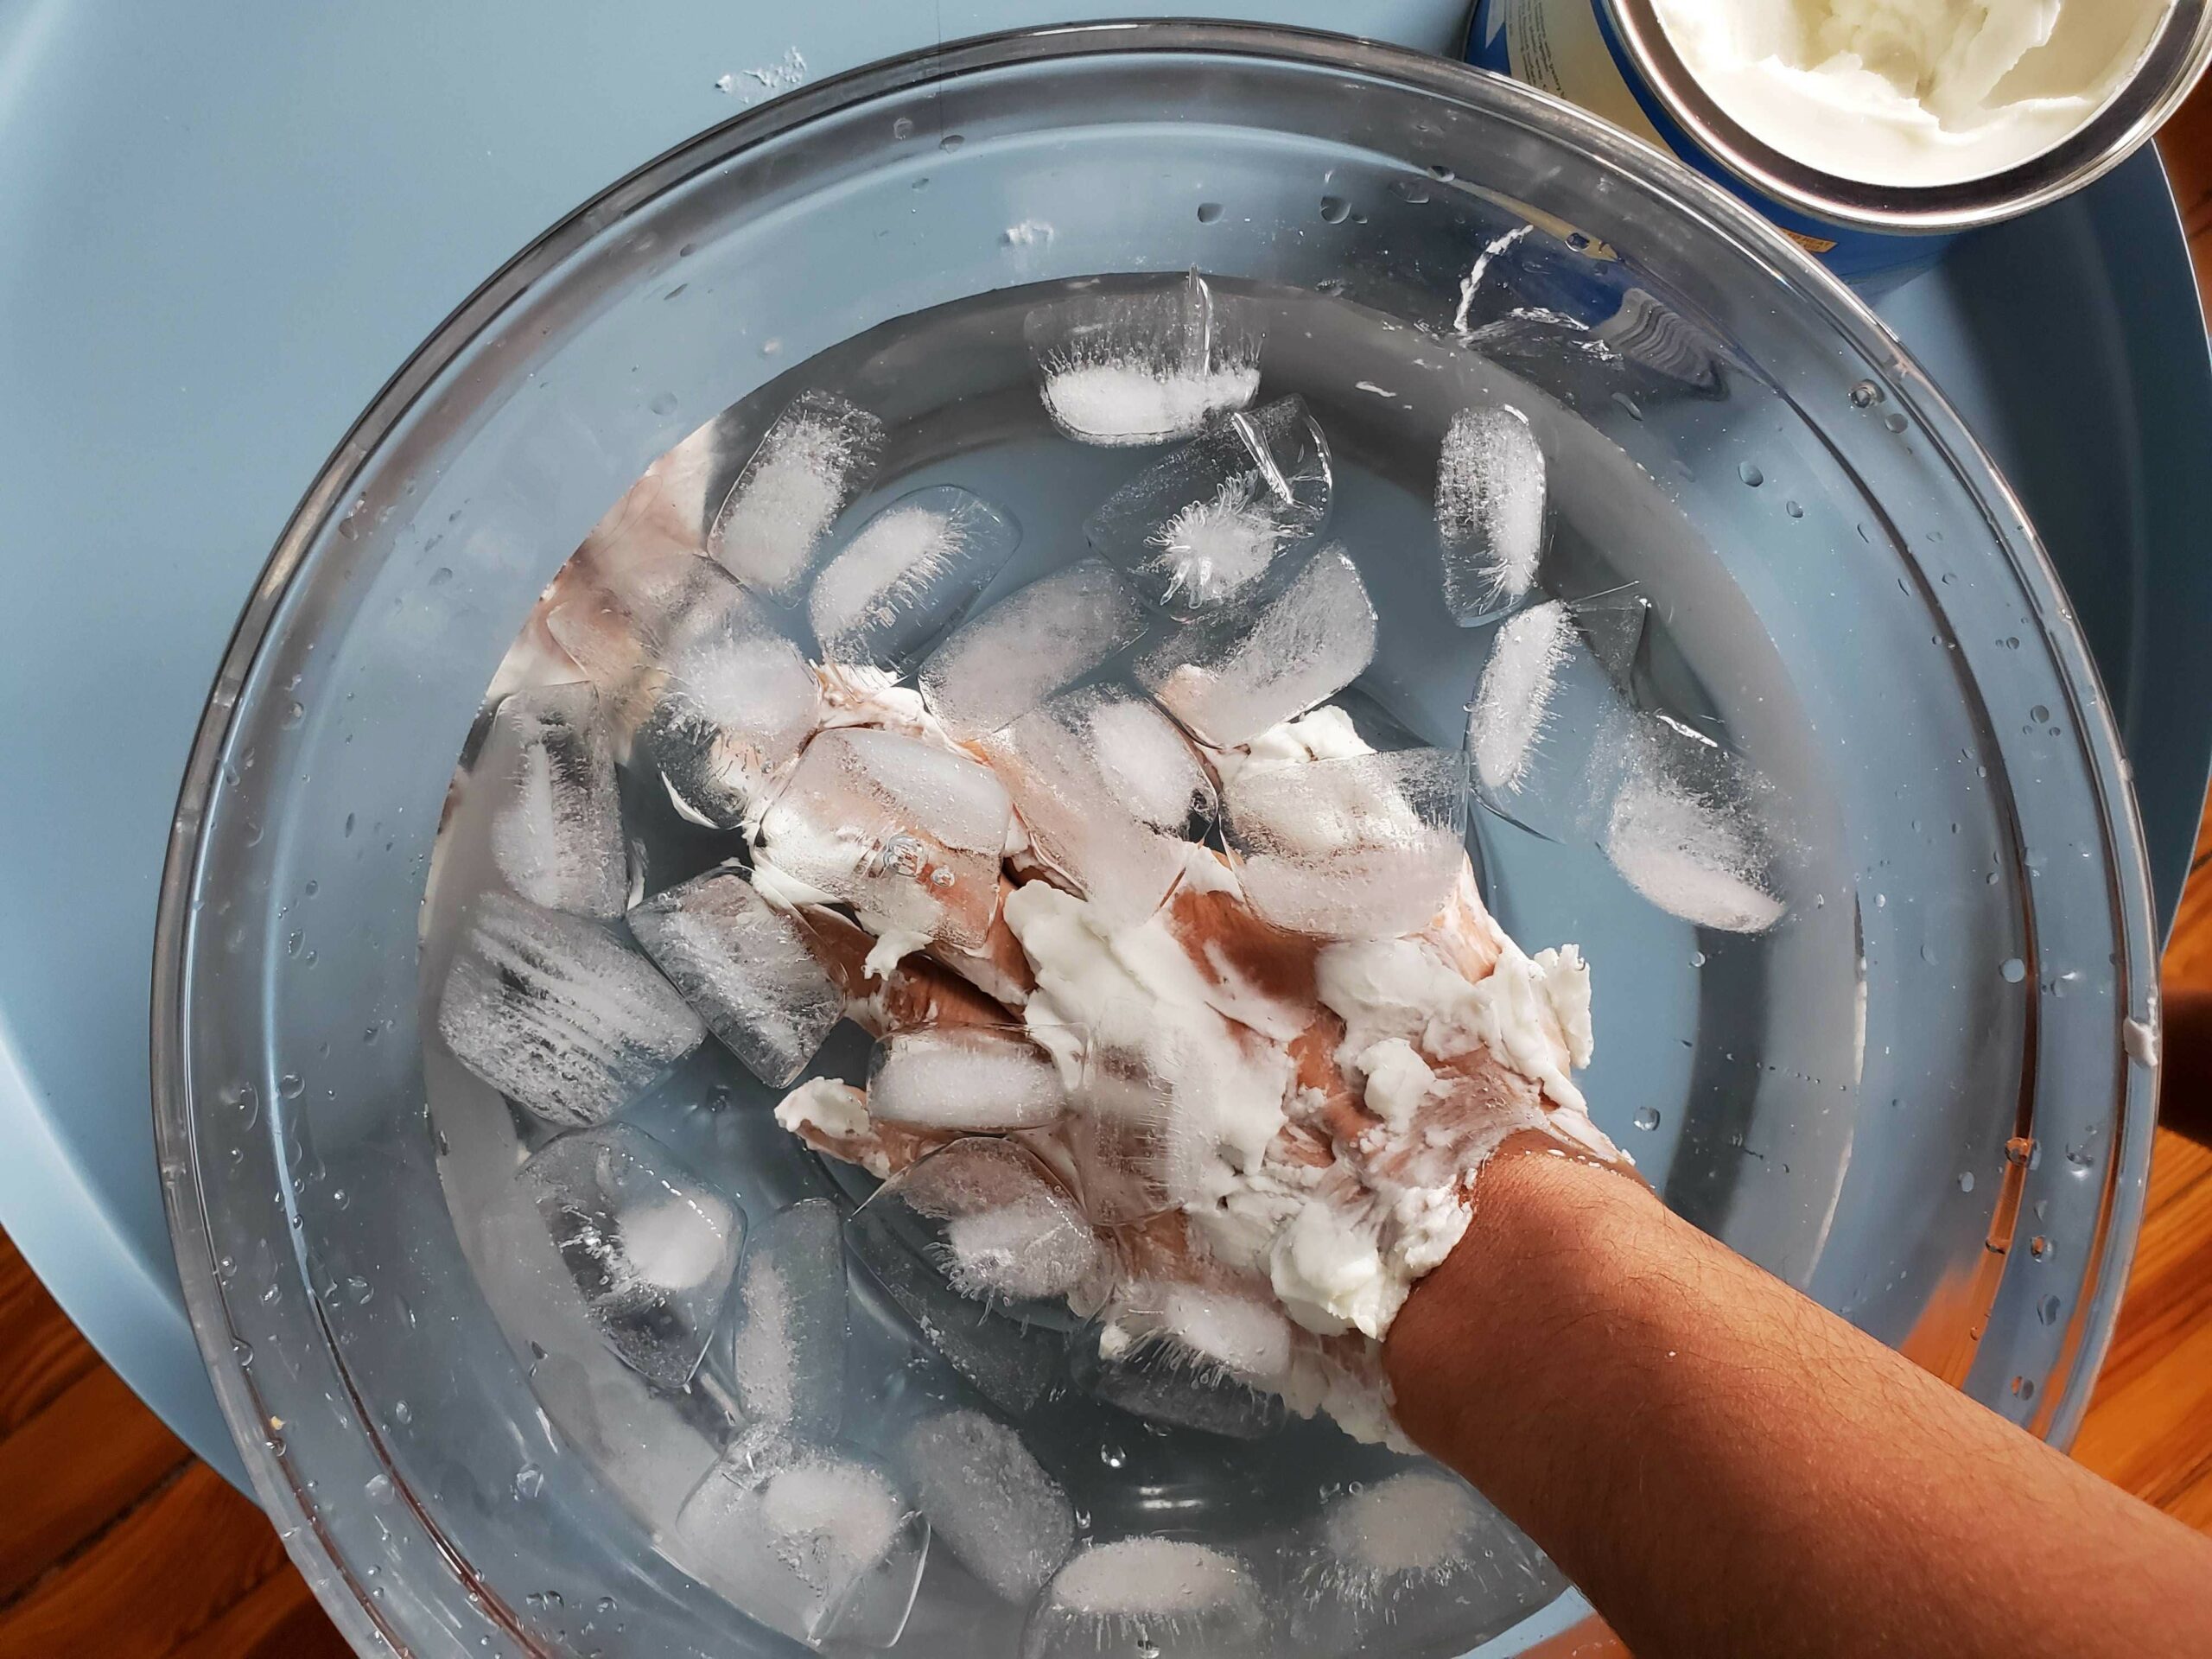 Stay-at-home science project: Craft handmade blubber